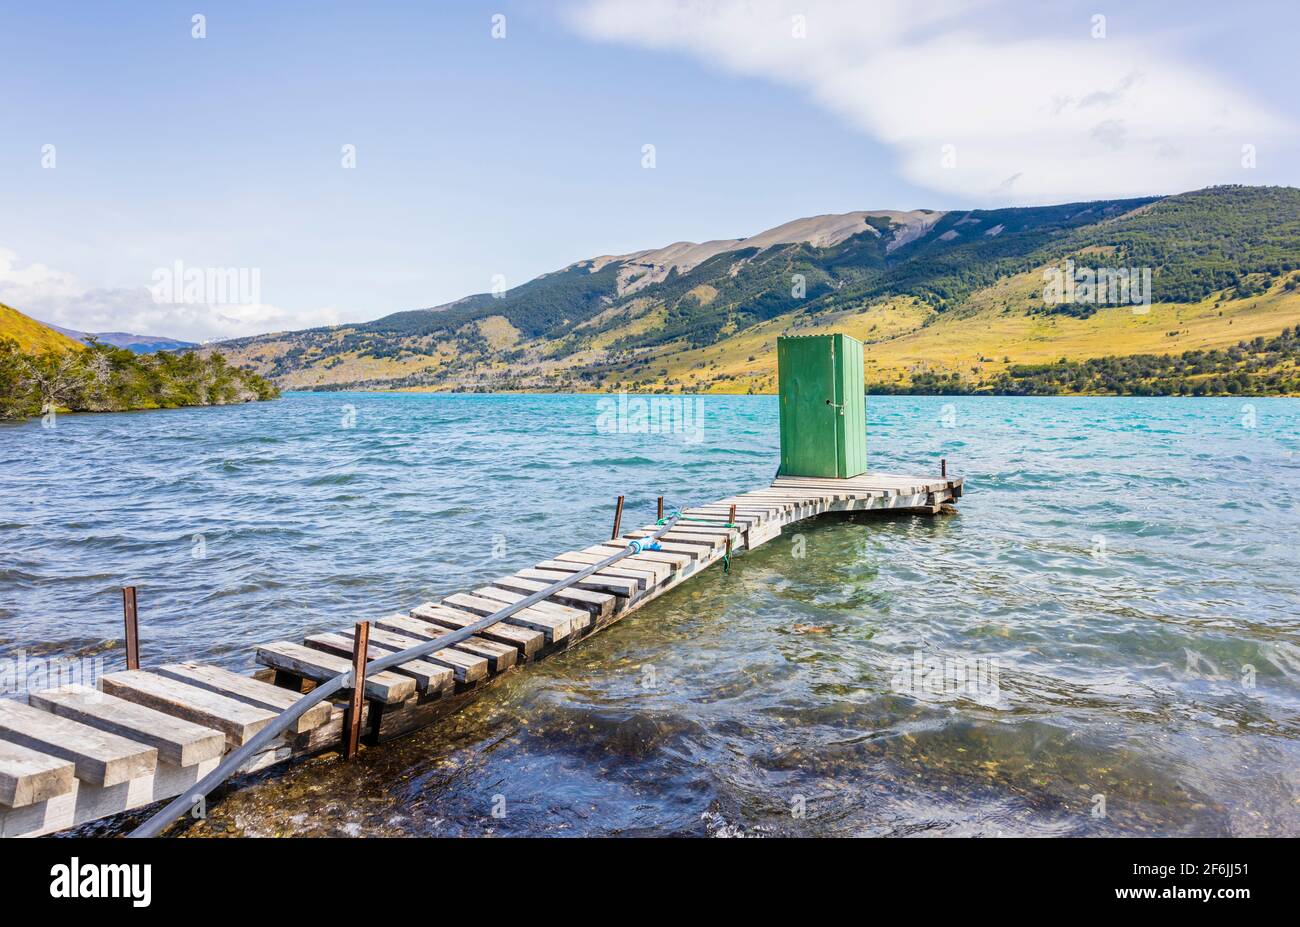 Green lakeside outdoor toilet shed standing at the end of a wooden jetty on Languna Azul, Torres del Paine National Park, Patagonia, southern Chile Stock Photo